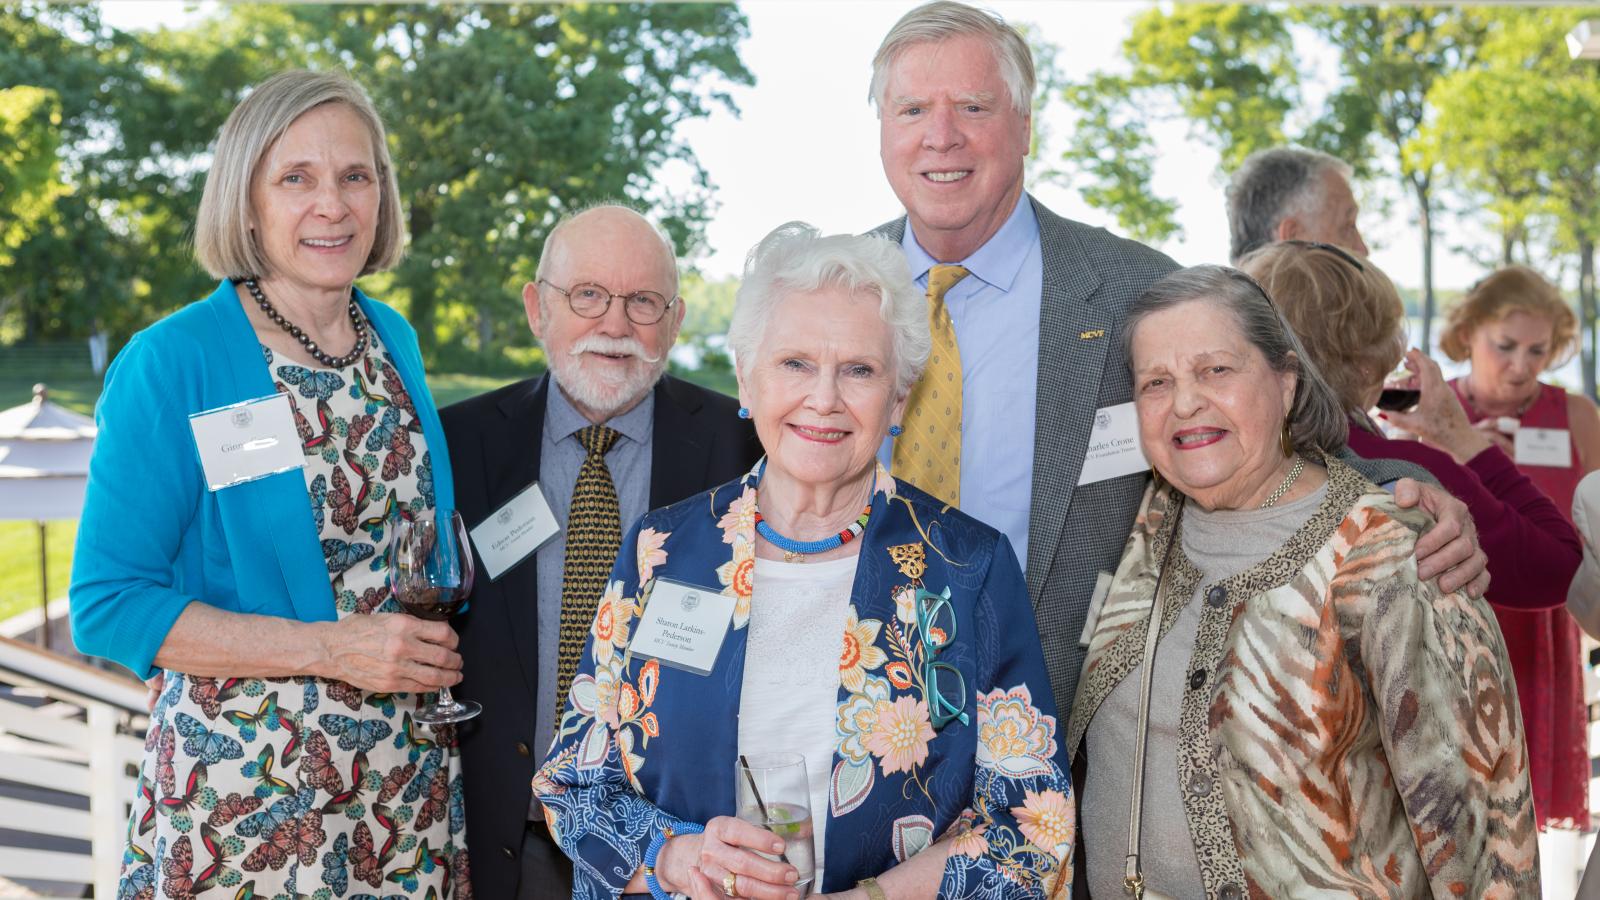 Ginny Crone, Edson Pederson, Sharon Larkins-Pederson, Charles Crone and Bertha Rolfe share a moment at our MCV Society event in May.